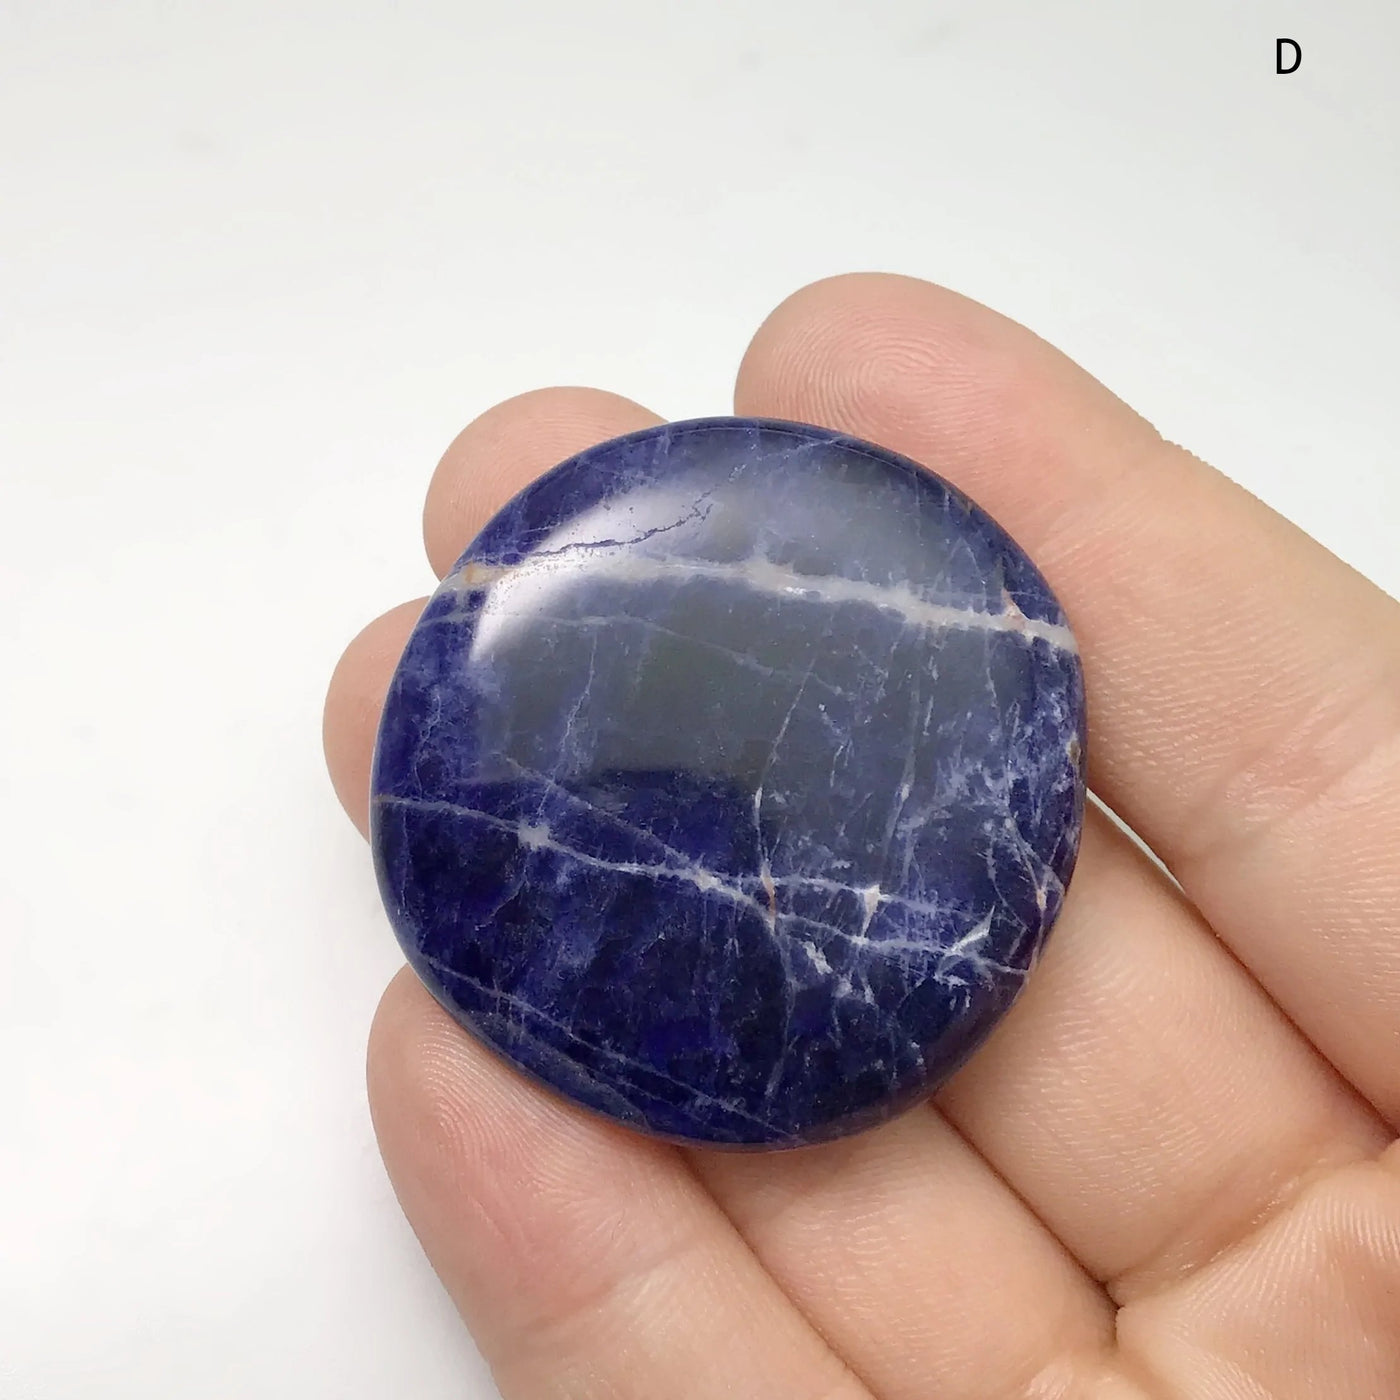 Sodalite Touch Stone at $29 Each